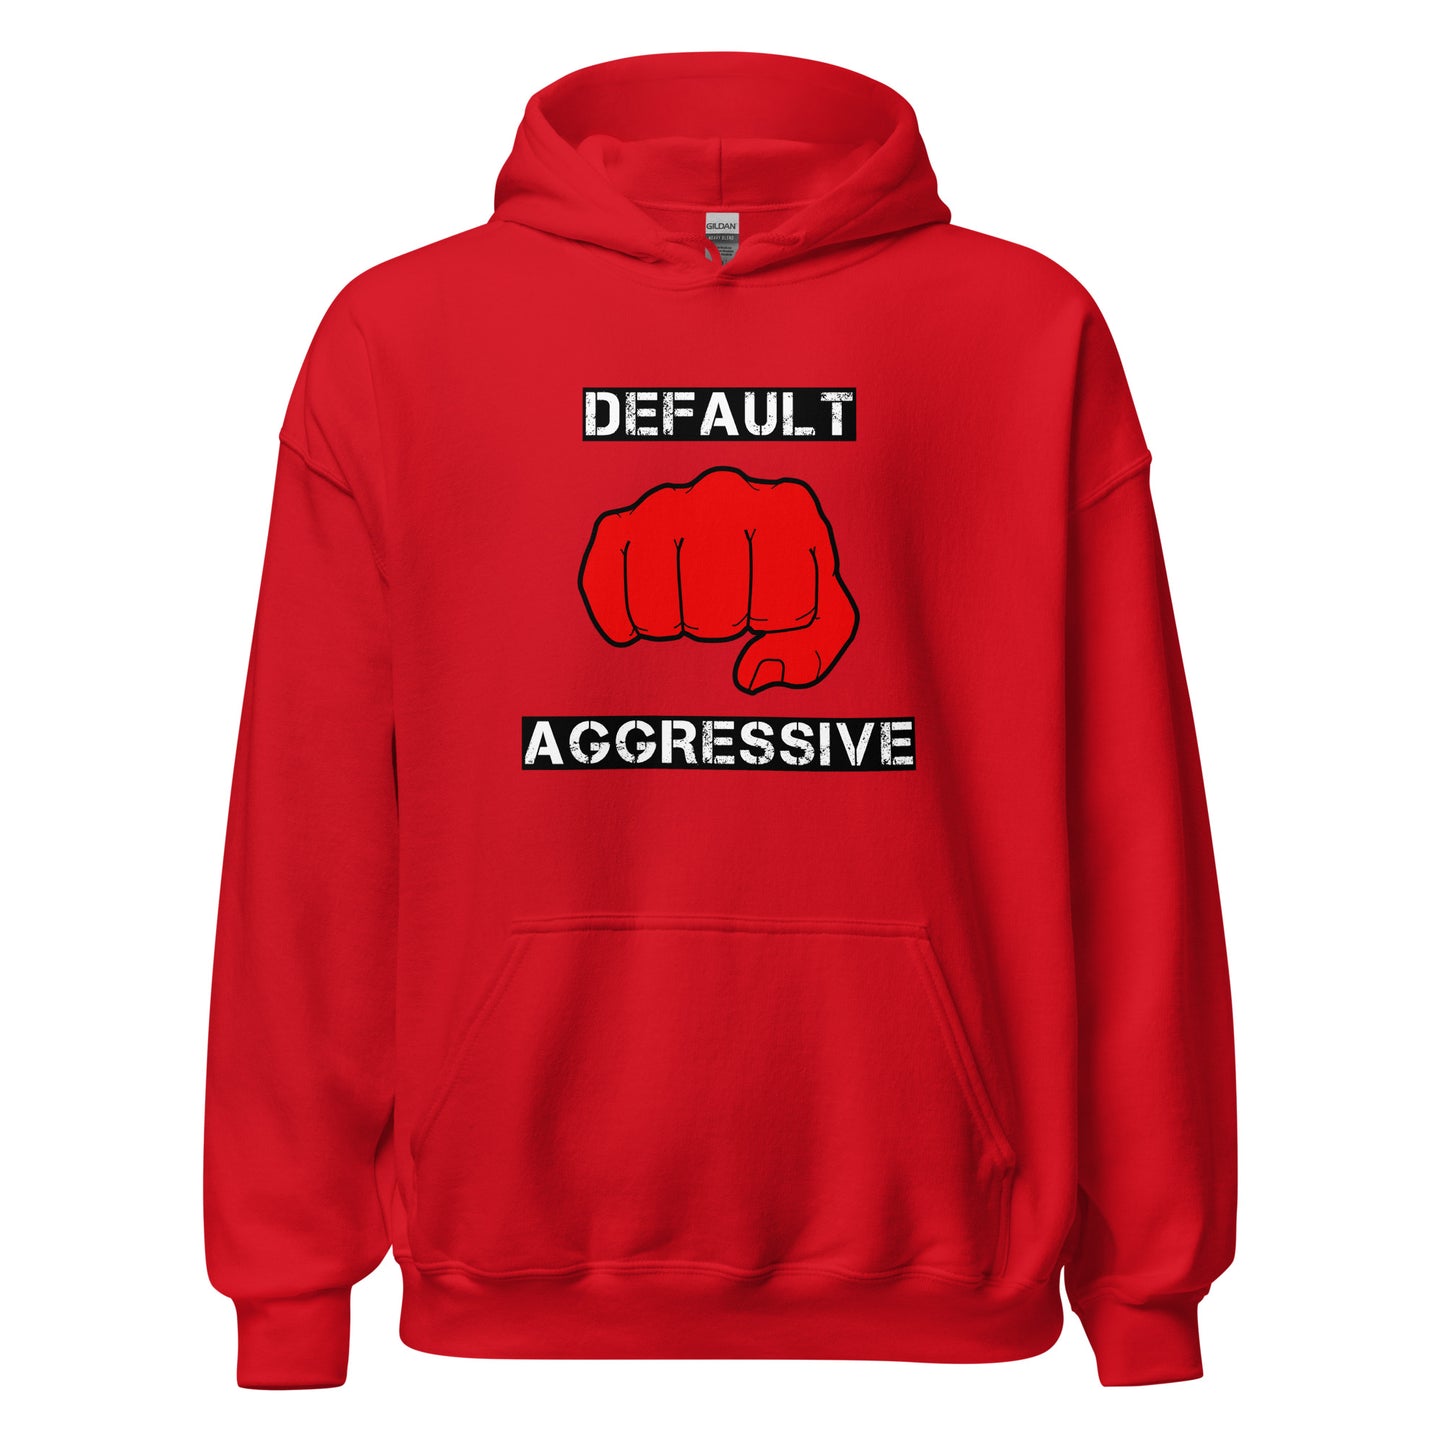 Default Aggressive Hoodie in Red